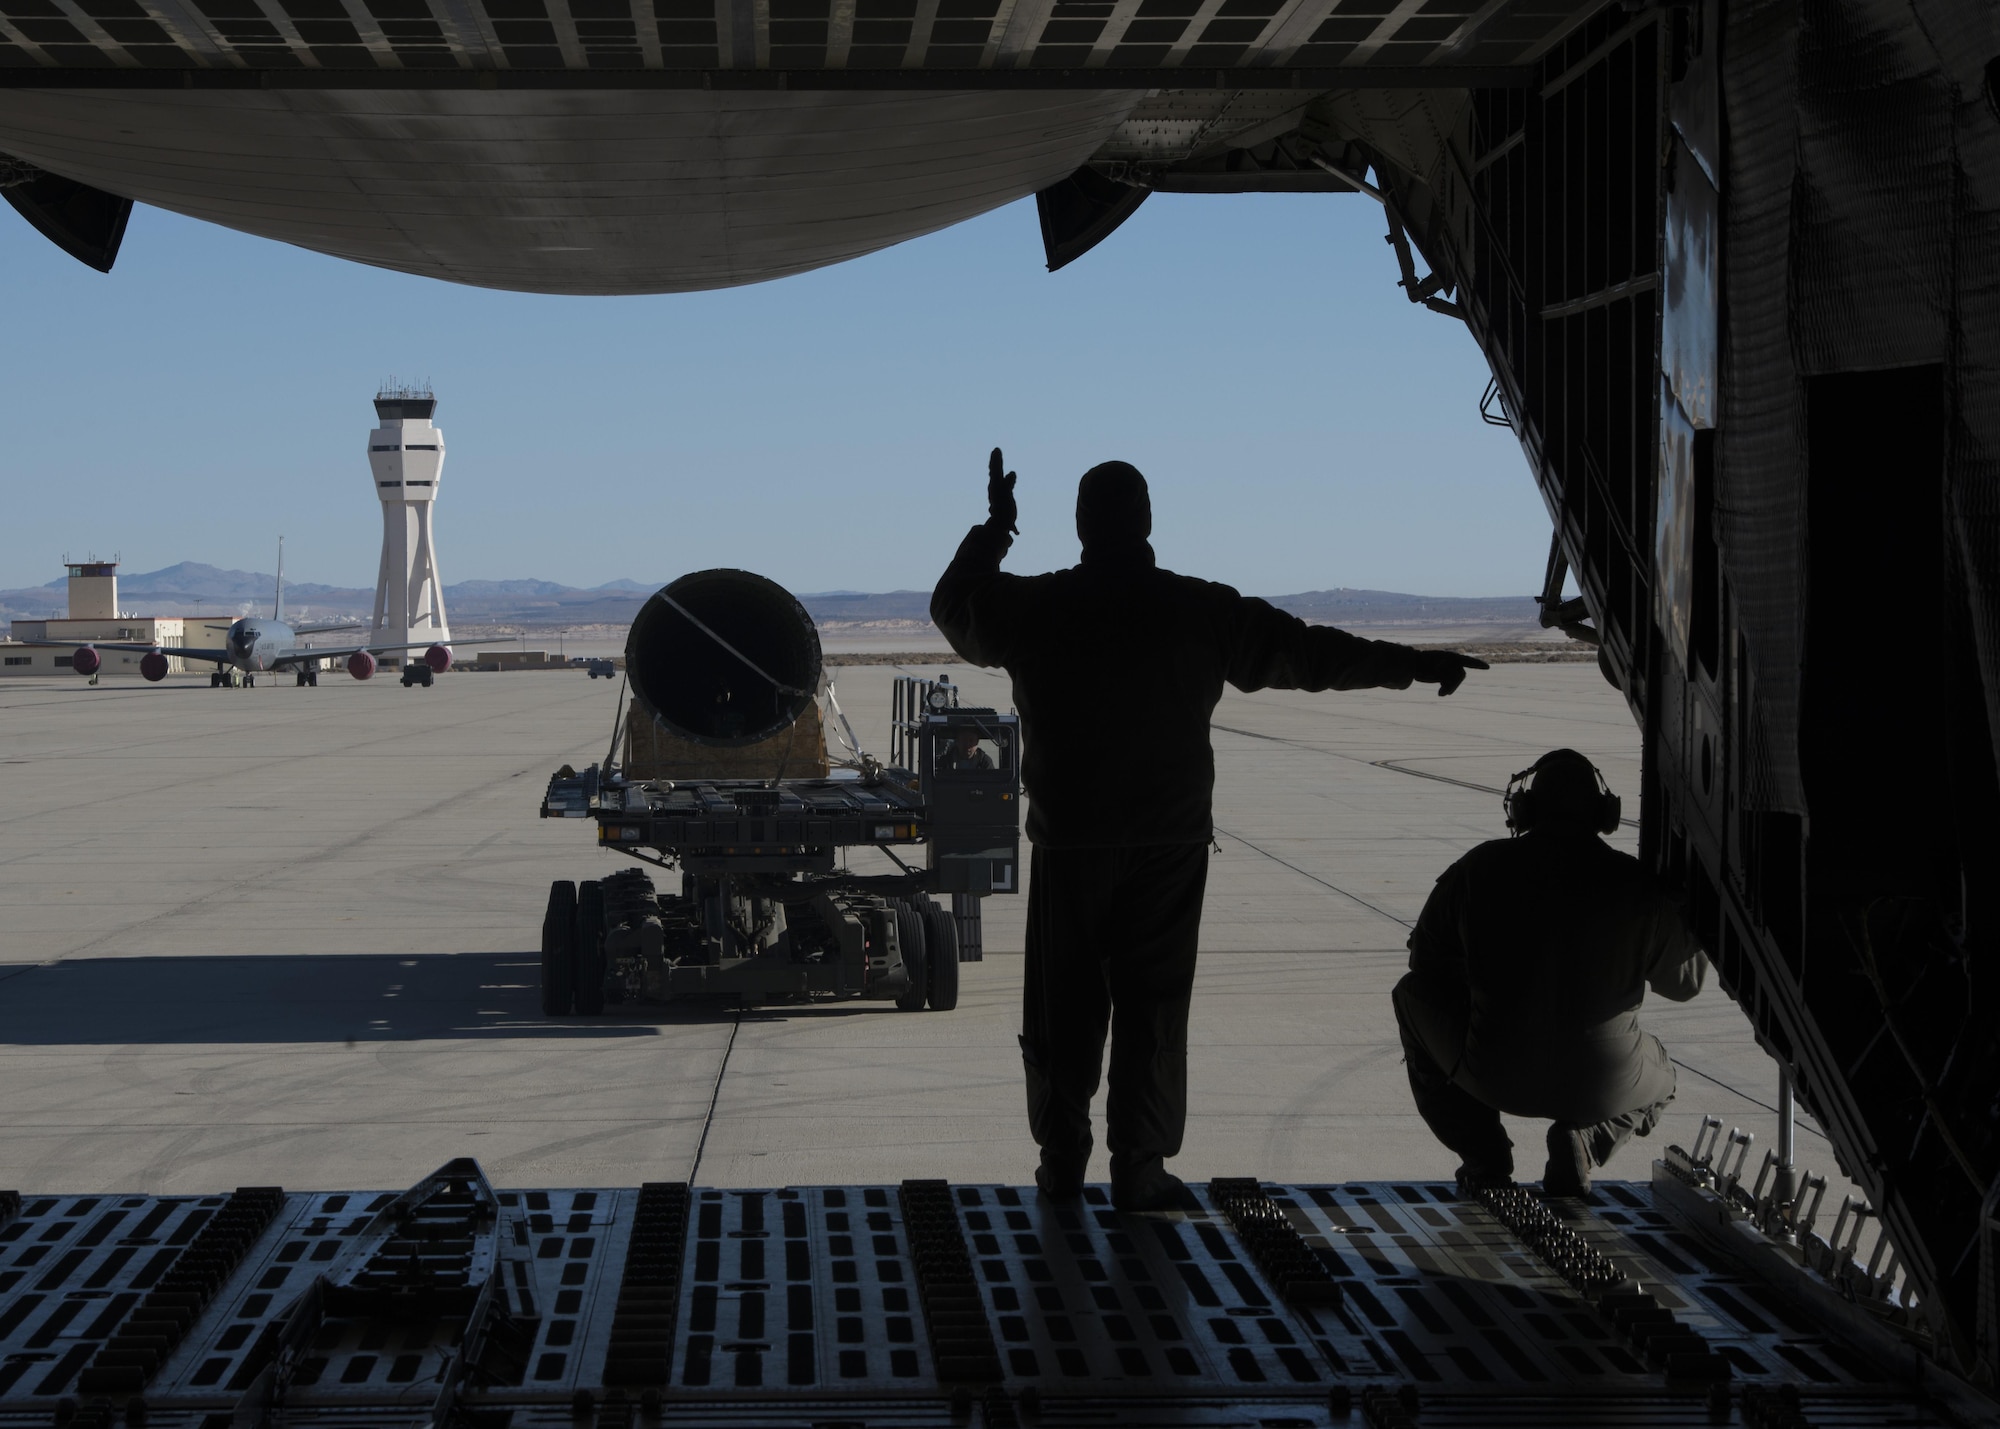 Master Sgt. Paul Adkins, 709th Airlift Squadron loadmaster, and Master Sgt. Bryan Muise, 709th AS loadmaster, martial a K-Loader, carrying a tail-boom from the Fairchild C-119B Flying Boxcar #48-0352 “Am Can Co Special,” toward the rear-cargo entrance of a C-5M Super Galaxy Dec. 19, 2016, at Edwards Air Force Base, Calif. This C-119 will be arguably the most historic aircraft in the Air Mobility Command Museum’s collection. (U.S. Air Force photo by Senior Airman Zachary Cacicia)